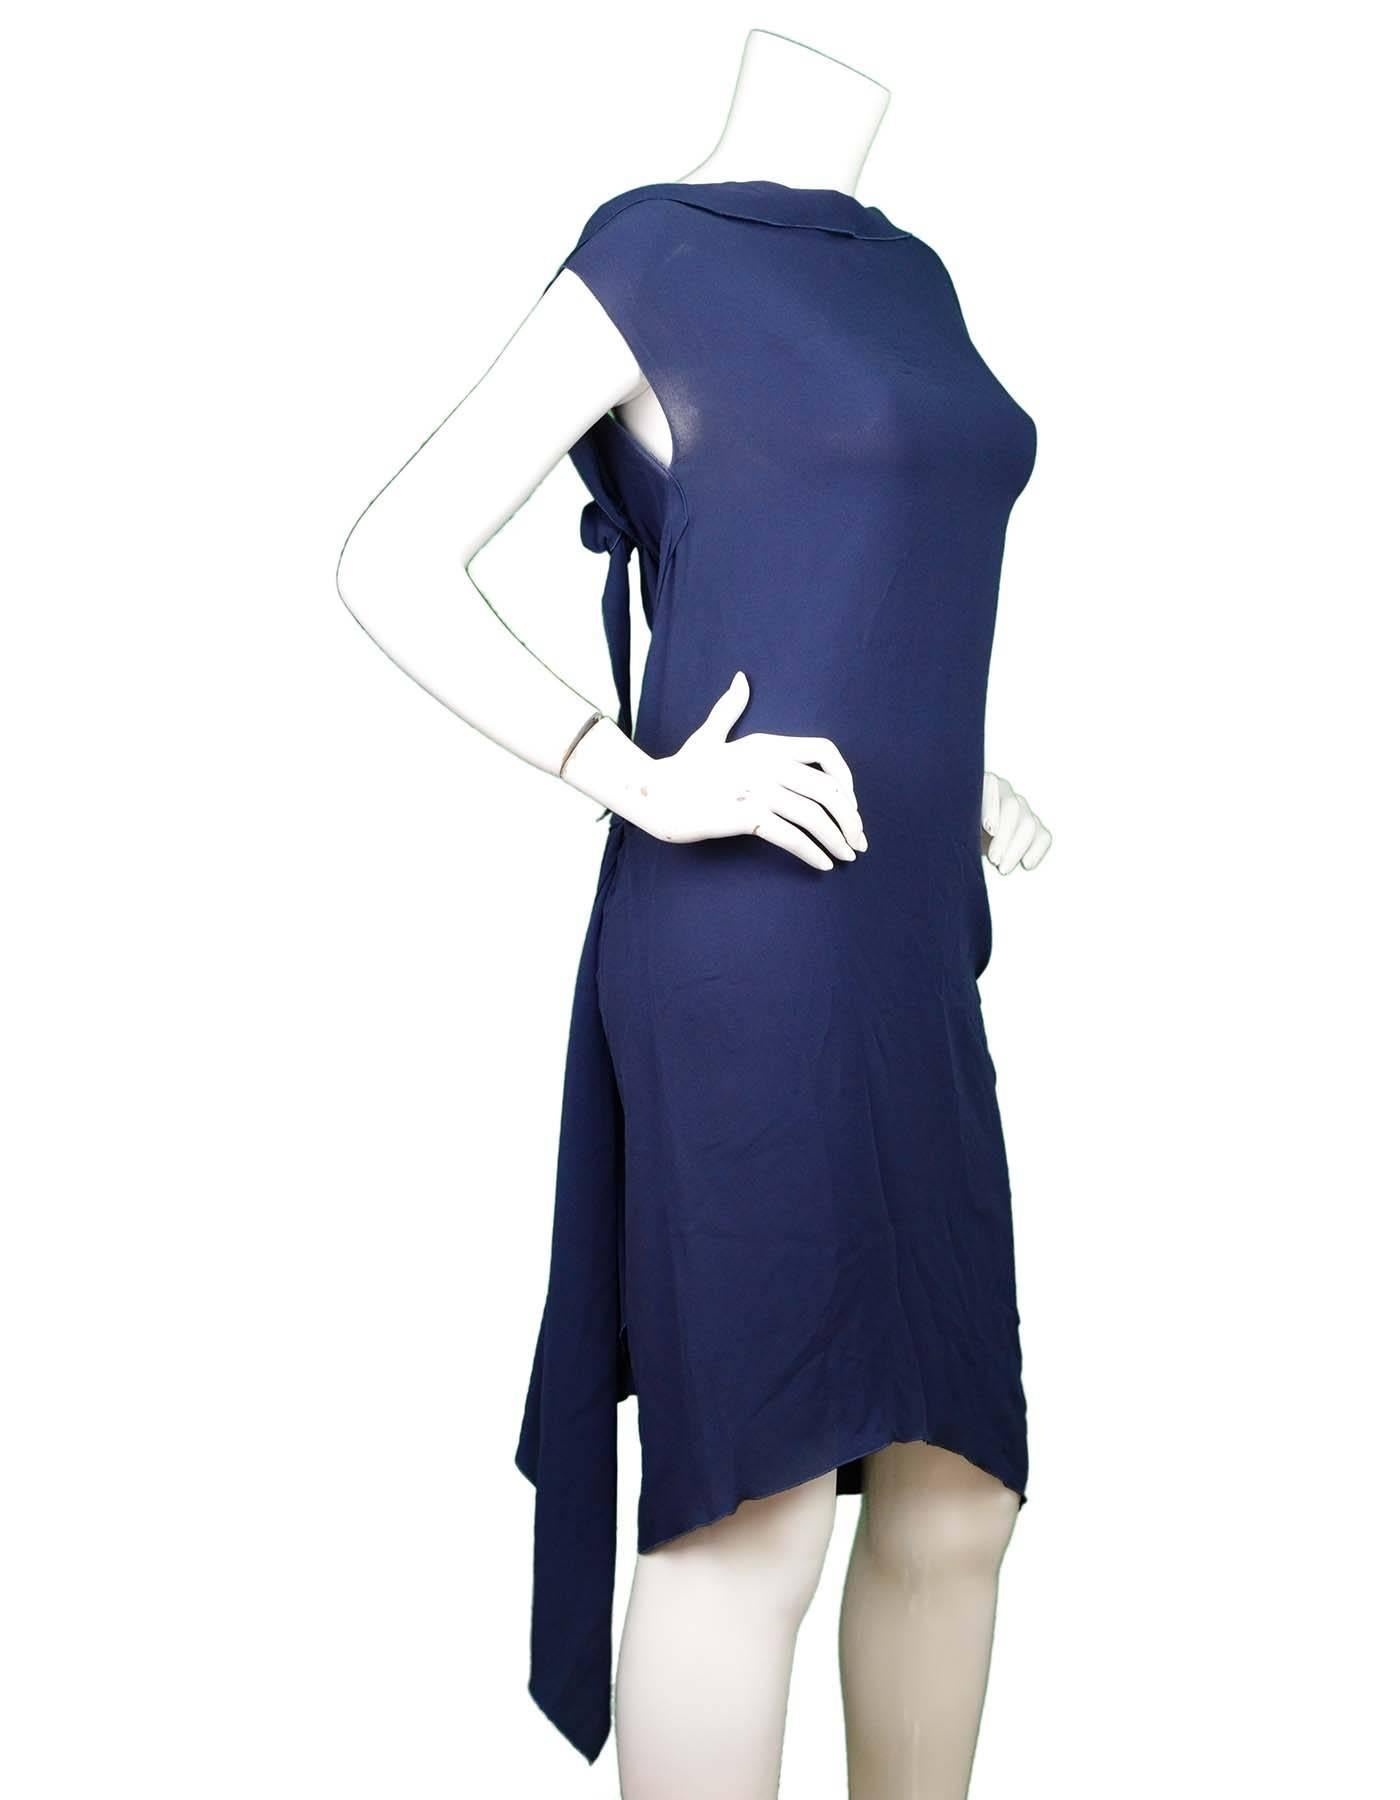 Vionnet Blue Silk Dress Sz 40
Features draped cowl neck and ruching/draping at back

Made In: Italy
Color: Blue
Composition: 100% Silk
Lining: Blue textile
Closure/Opening: Pull over
Overall Condition: Excellent pre-owned condition with the